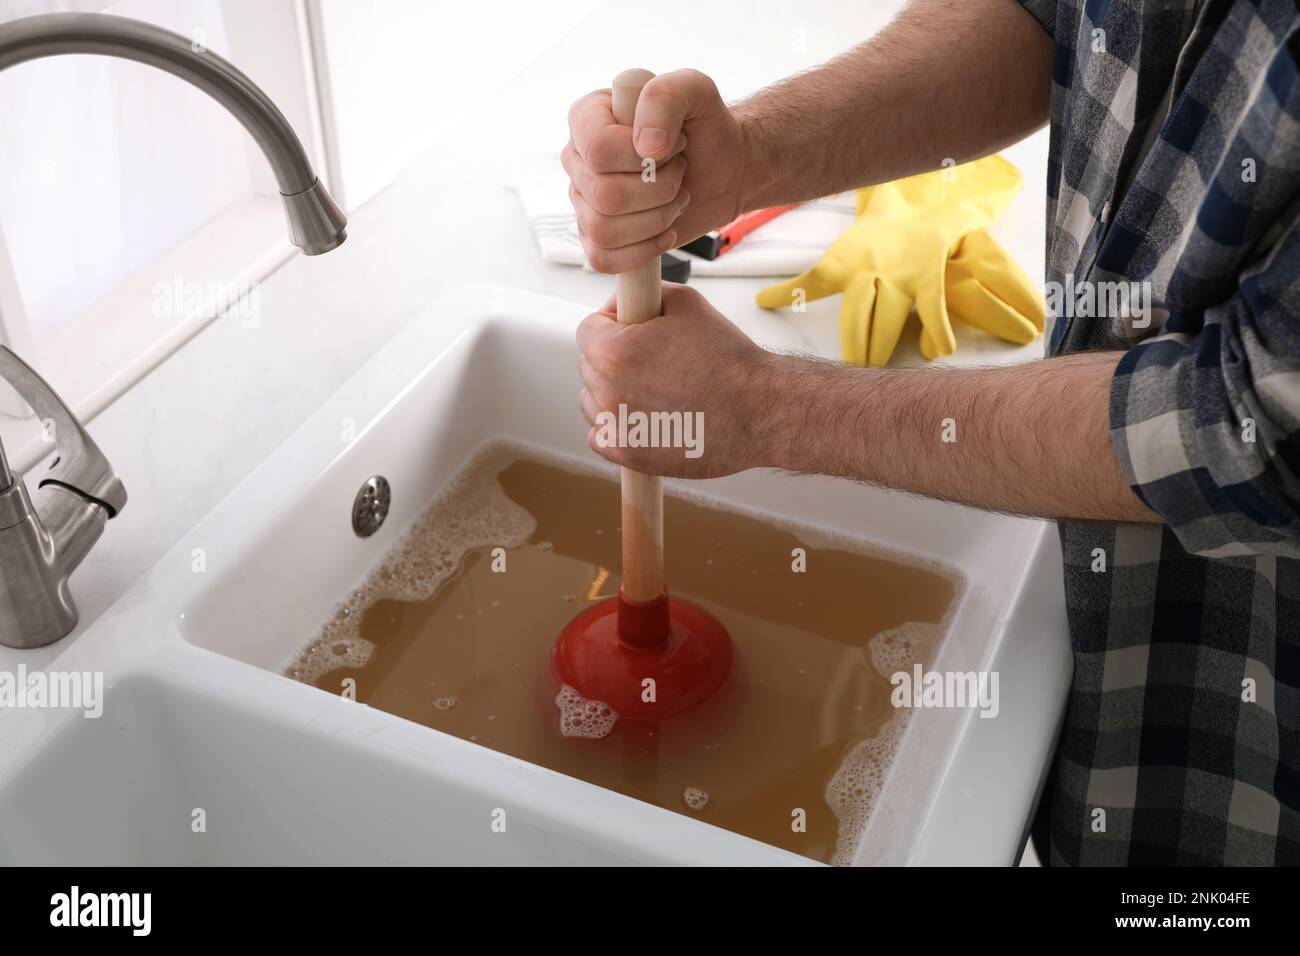 https://c8.alamy.com/comp/2NK04FE/man-using-plunger-to-unclog-sink-drain-in-kitchen-closeup-2NK04FE.jpg